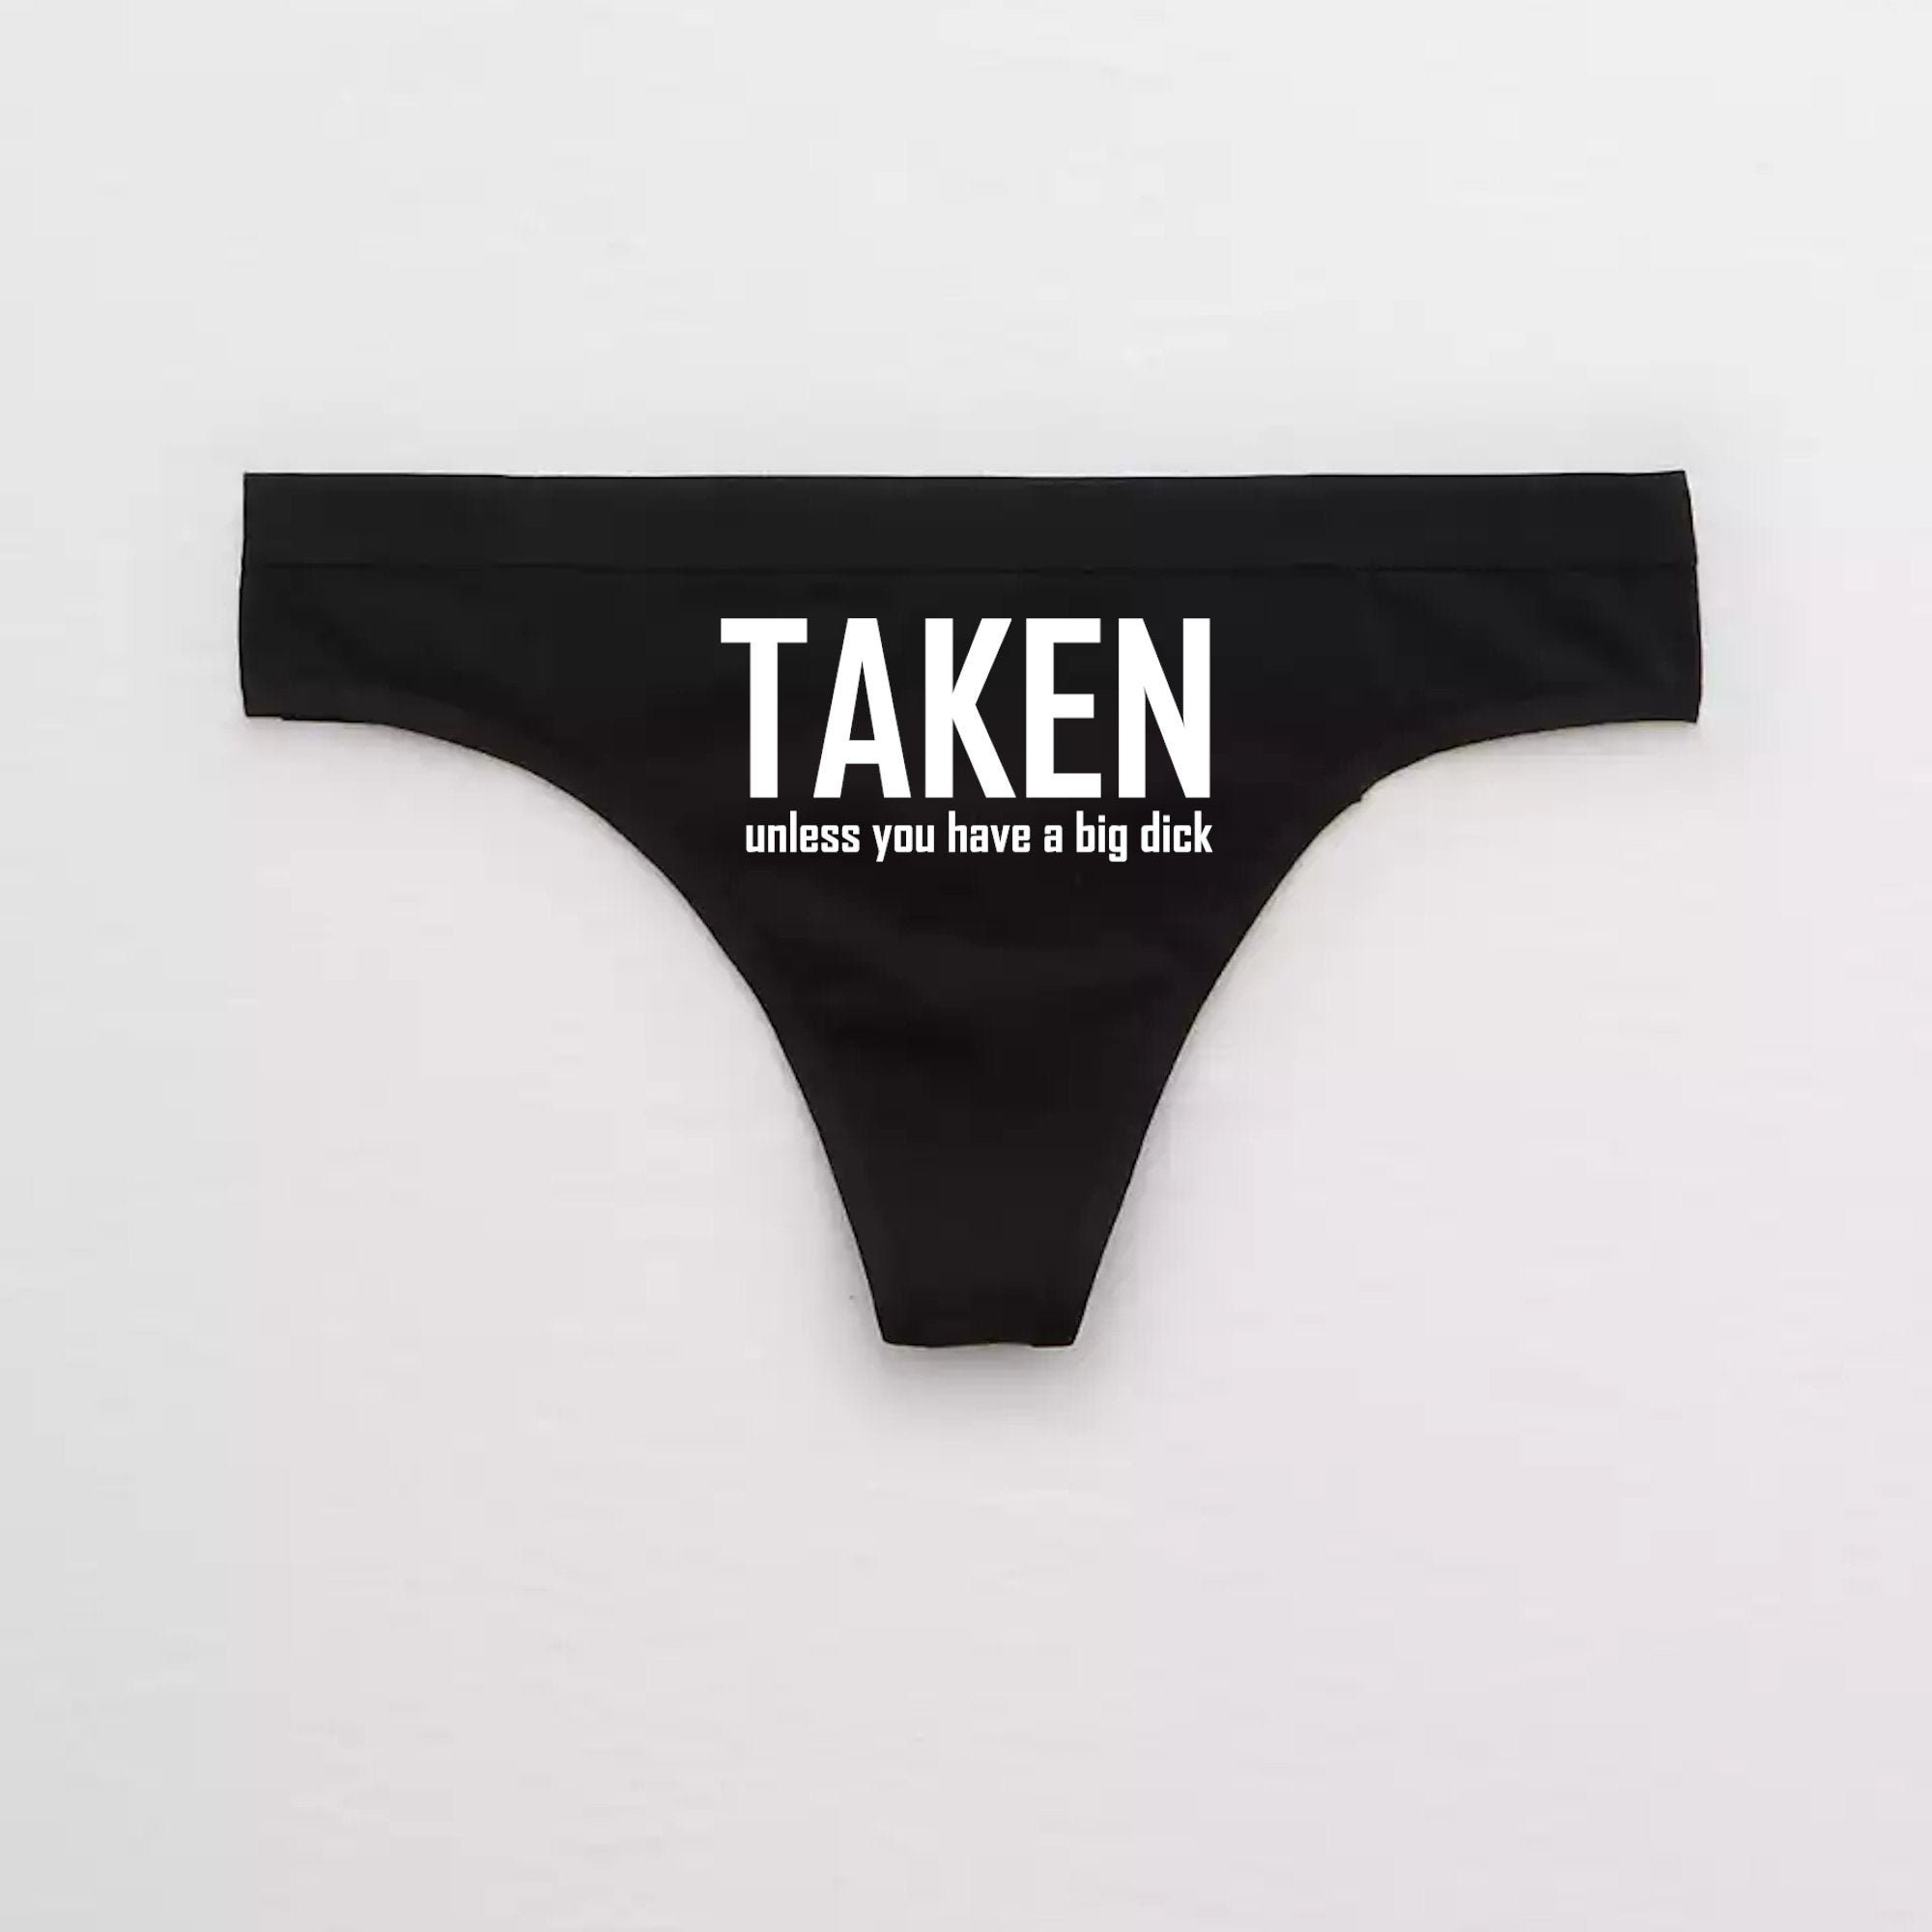 Taken Unless You Have a Big Dick Cuckold Thong / Hotwife Slut image photo picture